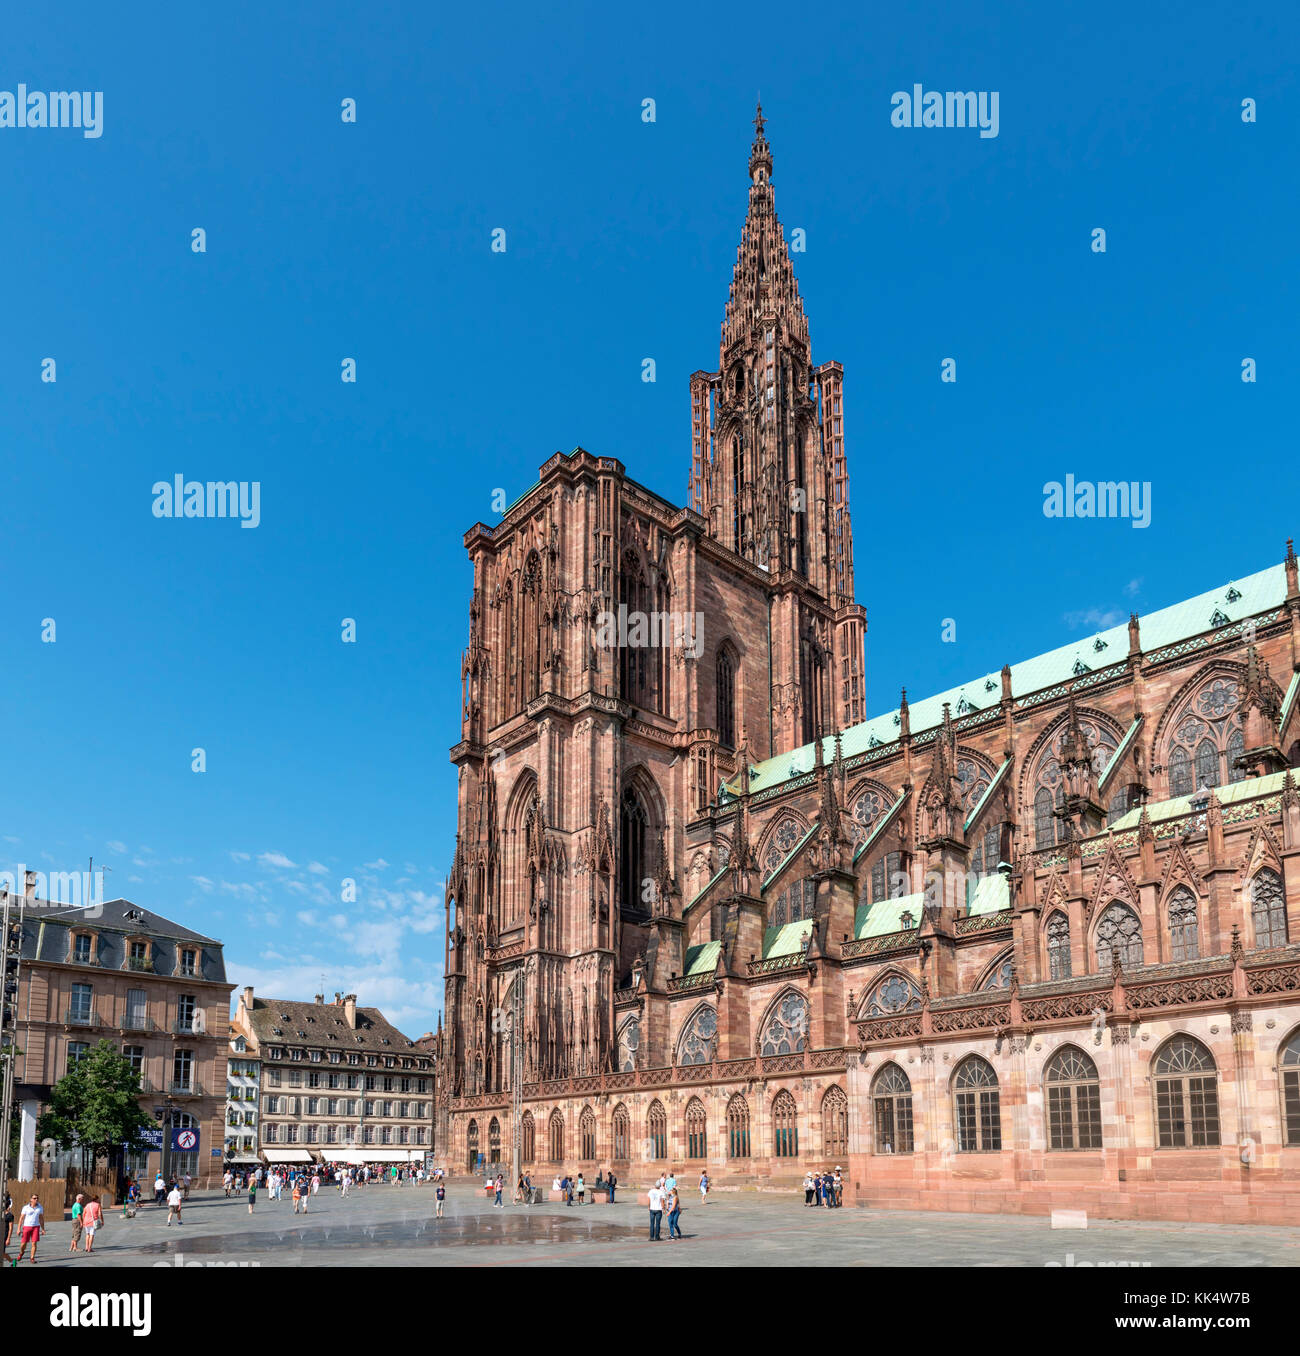 Strasbourg Cathdedral (Cathédrale Notre-Dame de Strasbourg) from Place du Chateau, Strasbourg, Alsace, France Stock Photo